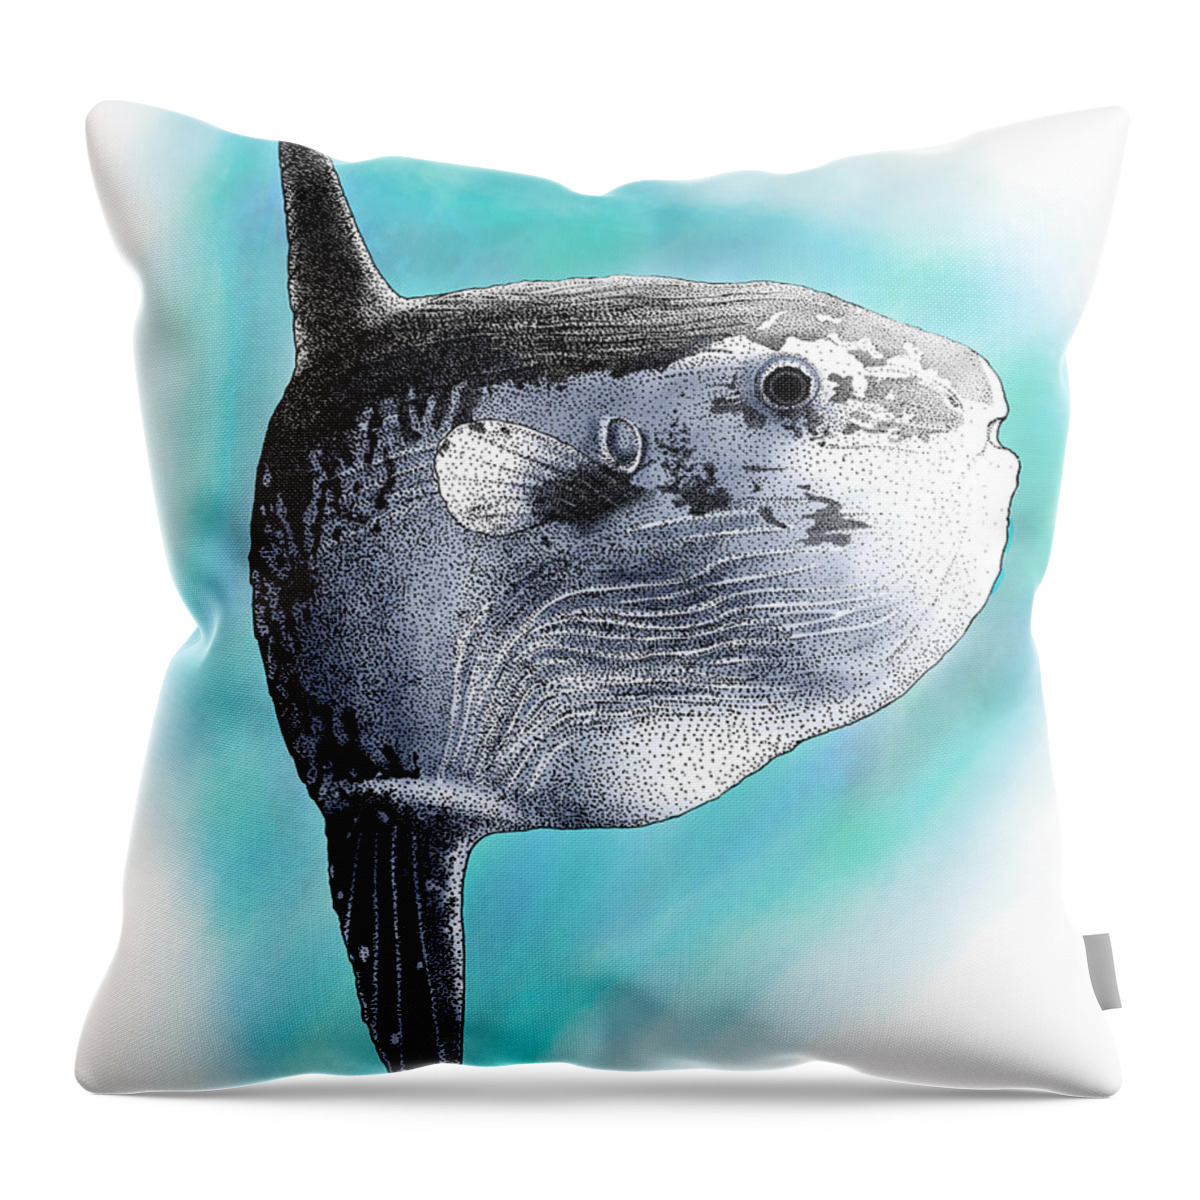 Art Throw Pillow featuring the photograph Ocean Sunfish by Roger Hall